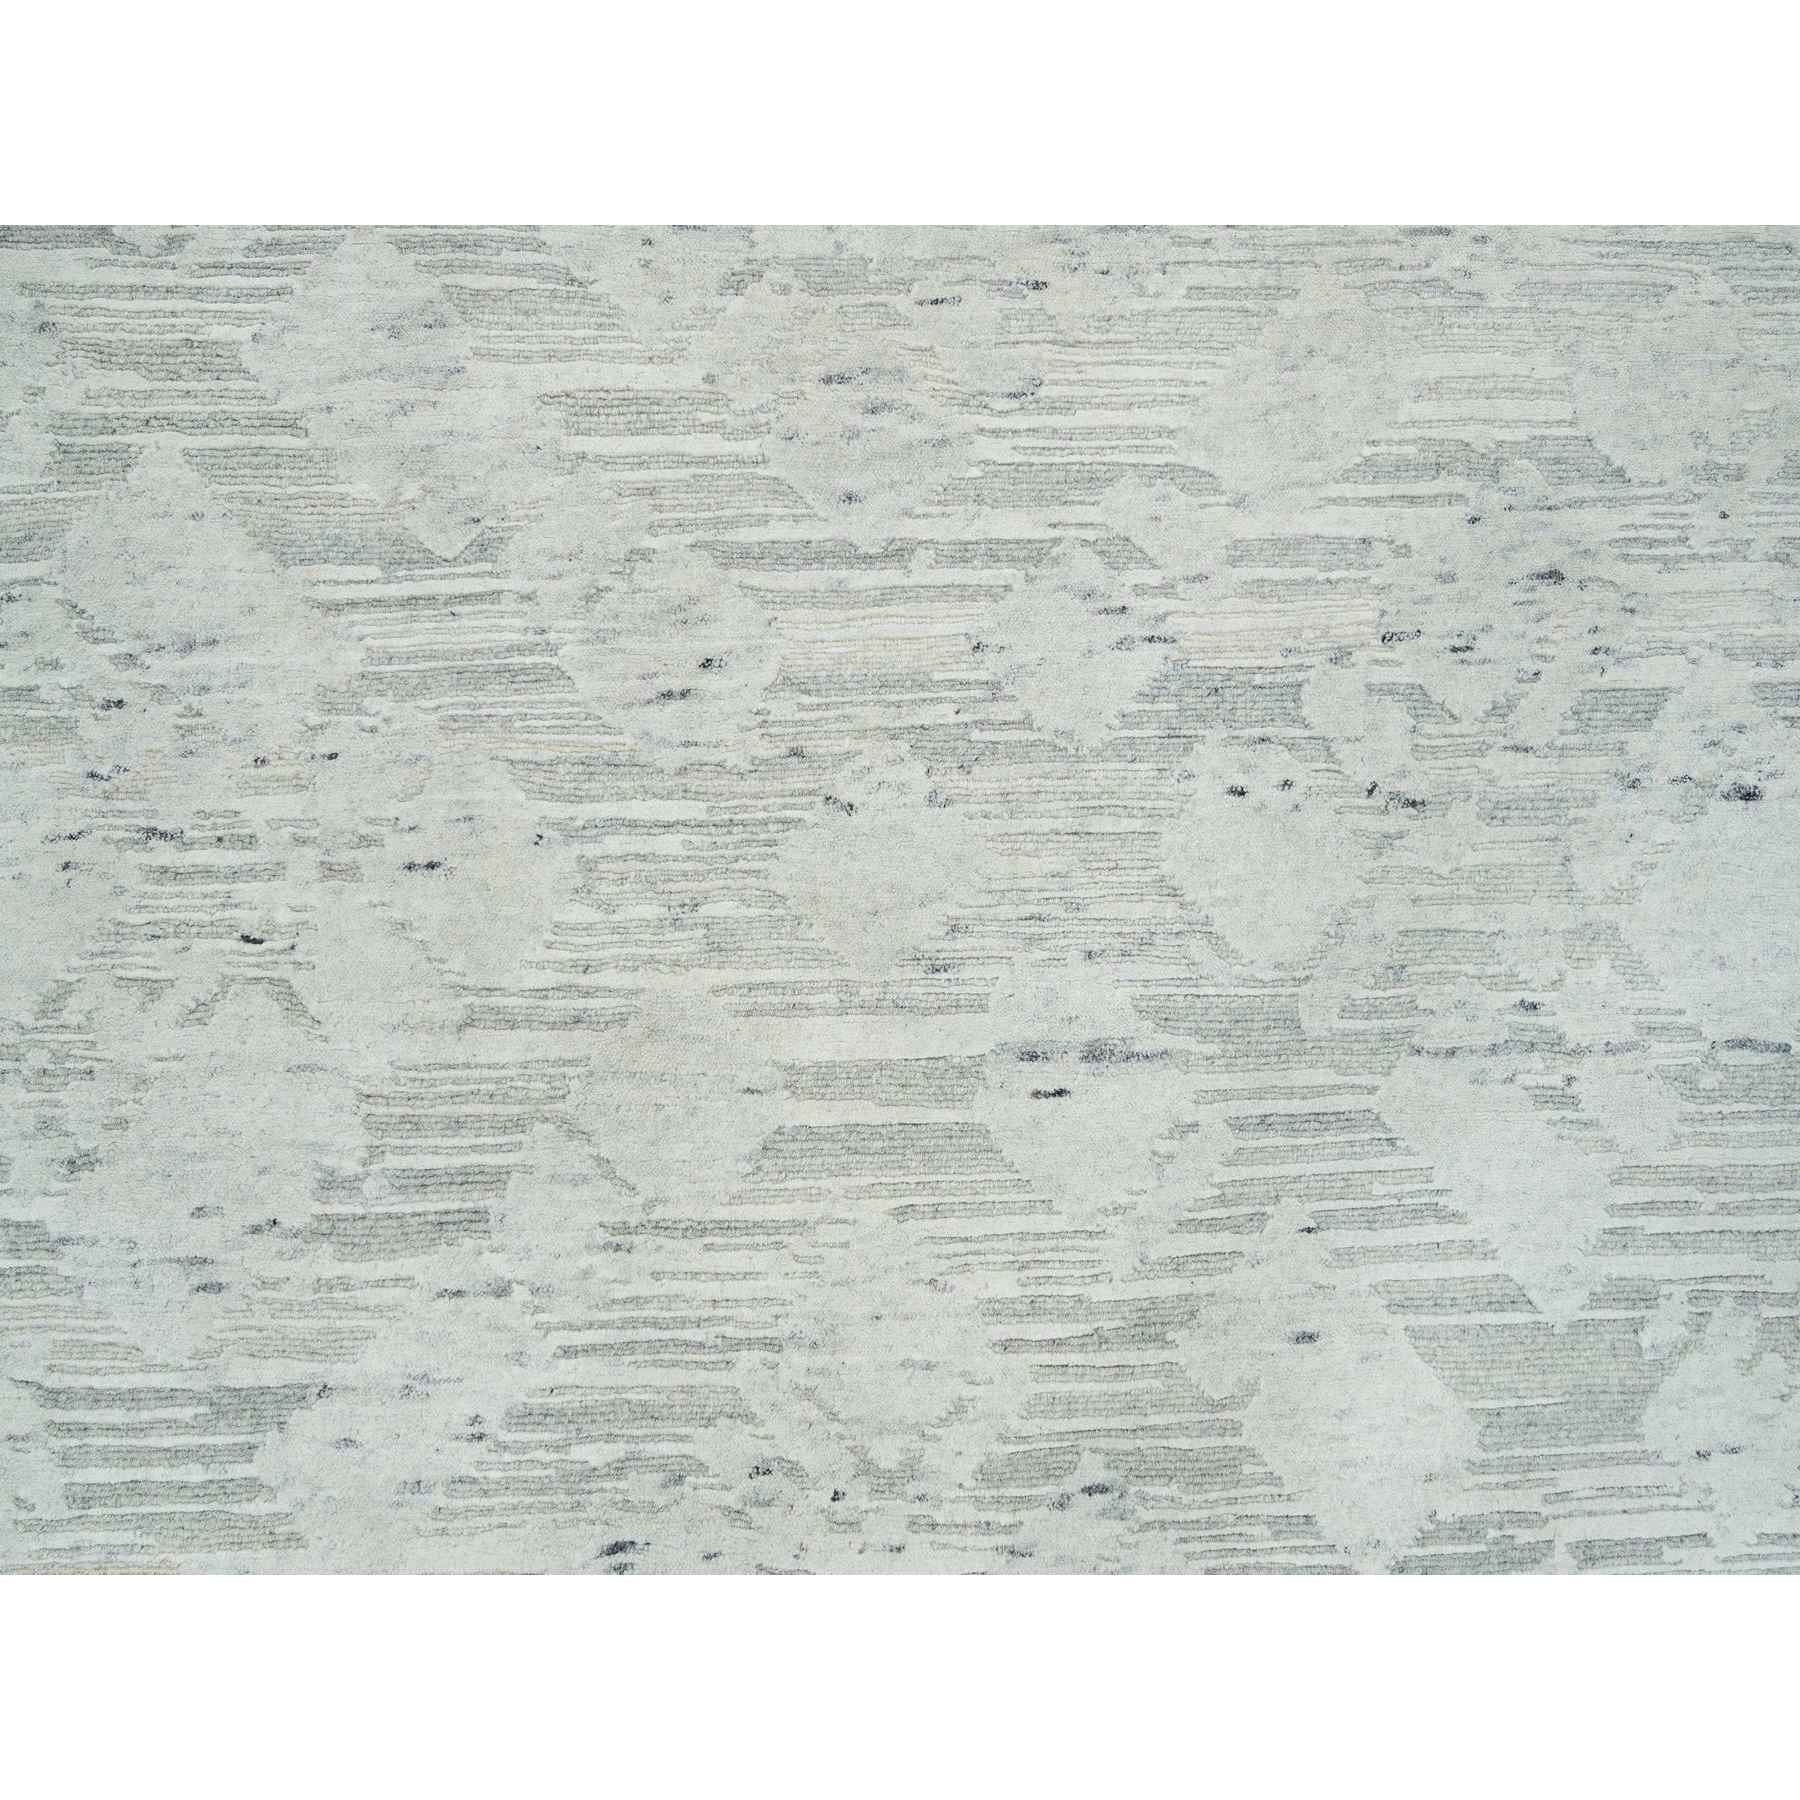 Modern-and-Contemporary-Hand-Knotted-Rug-328290